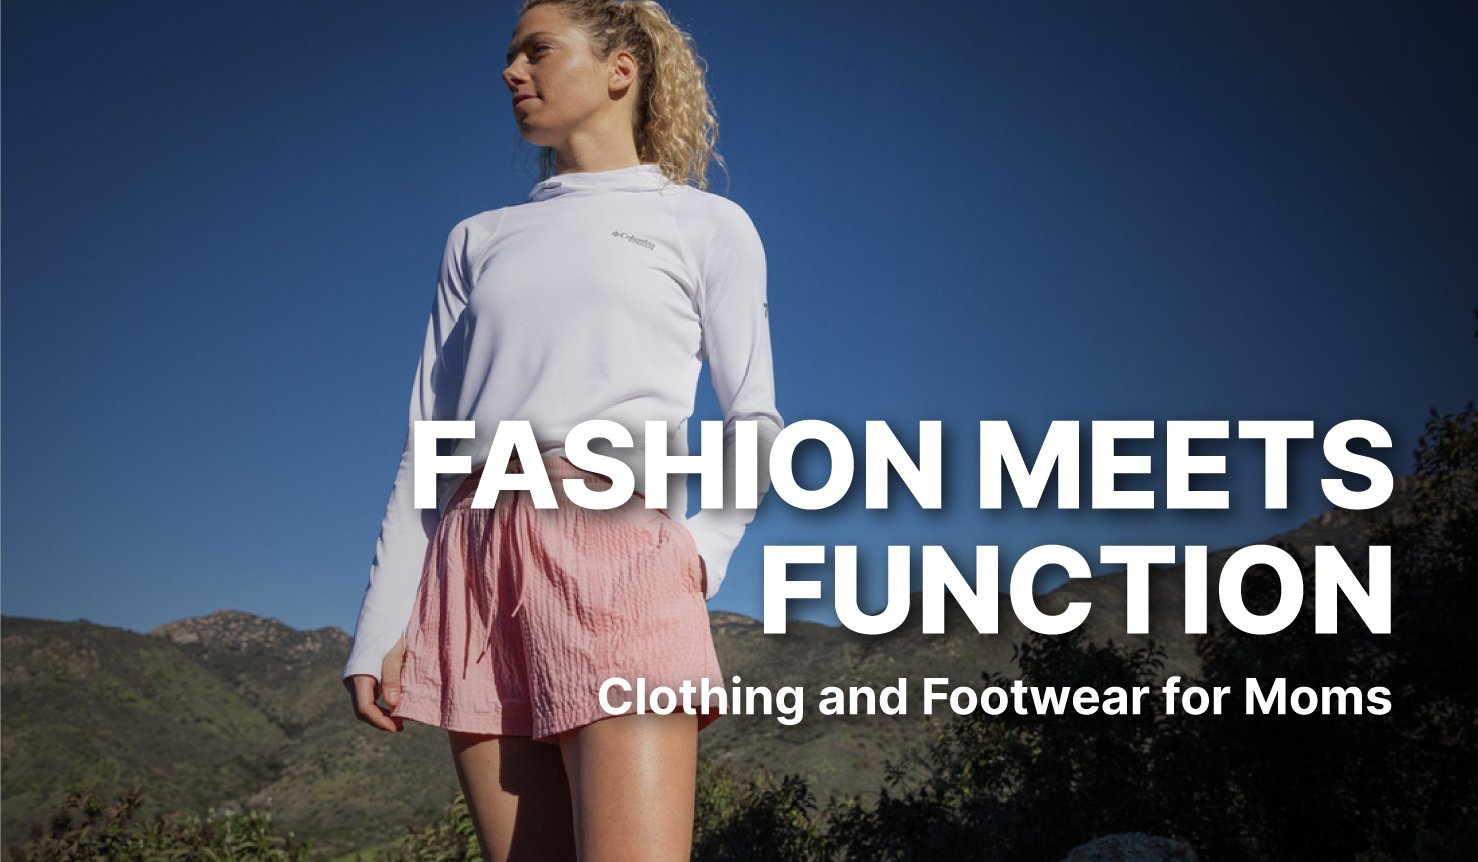 Fashion meets function - clothing and footwear for moms